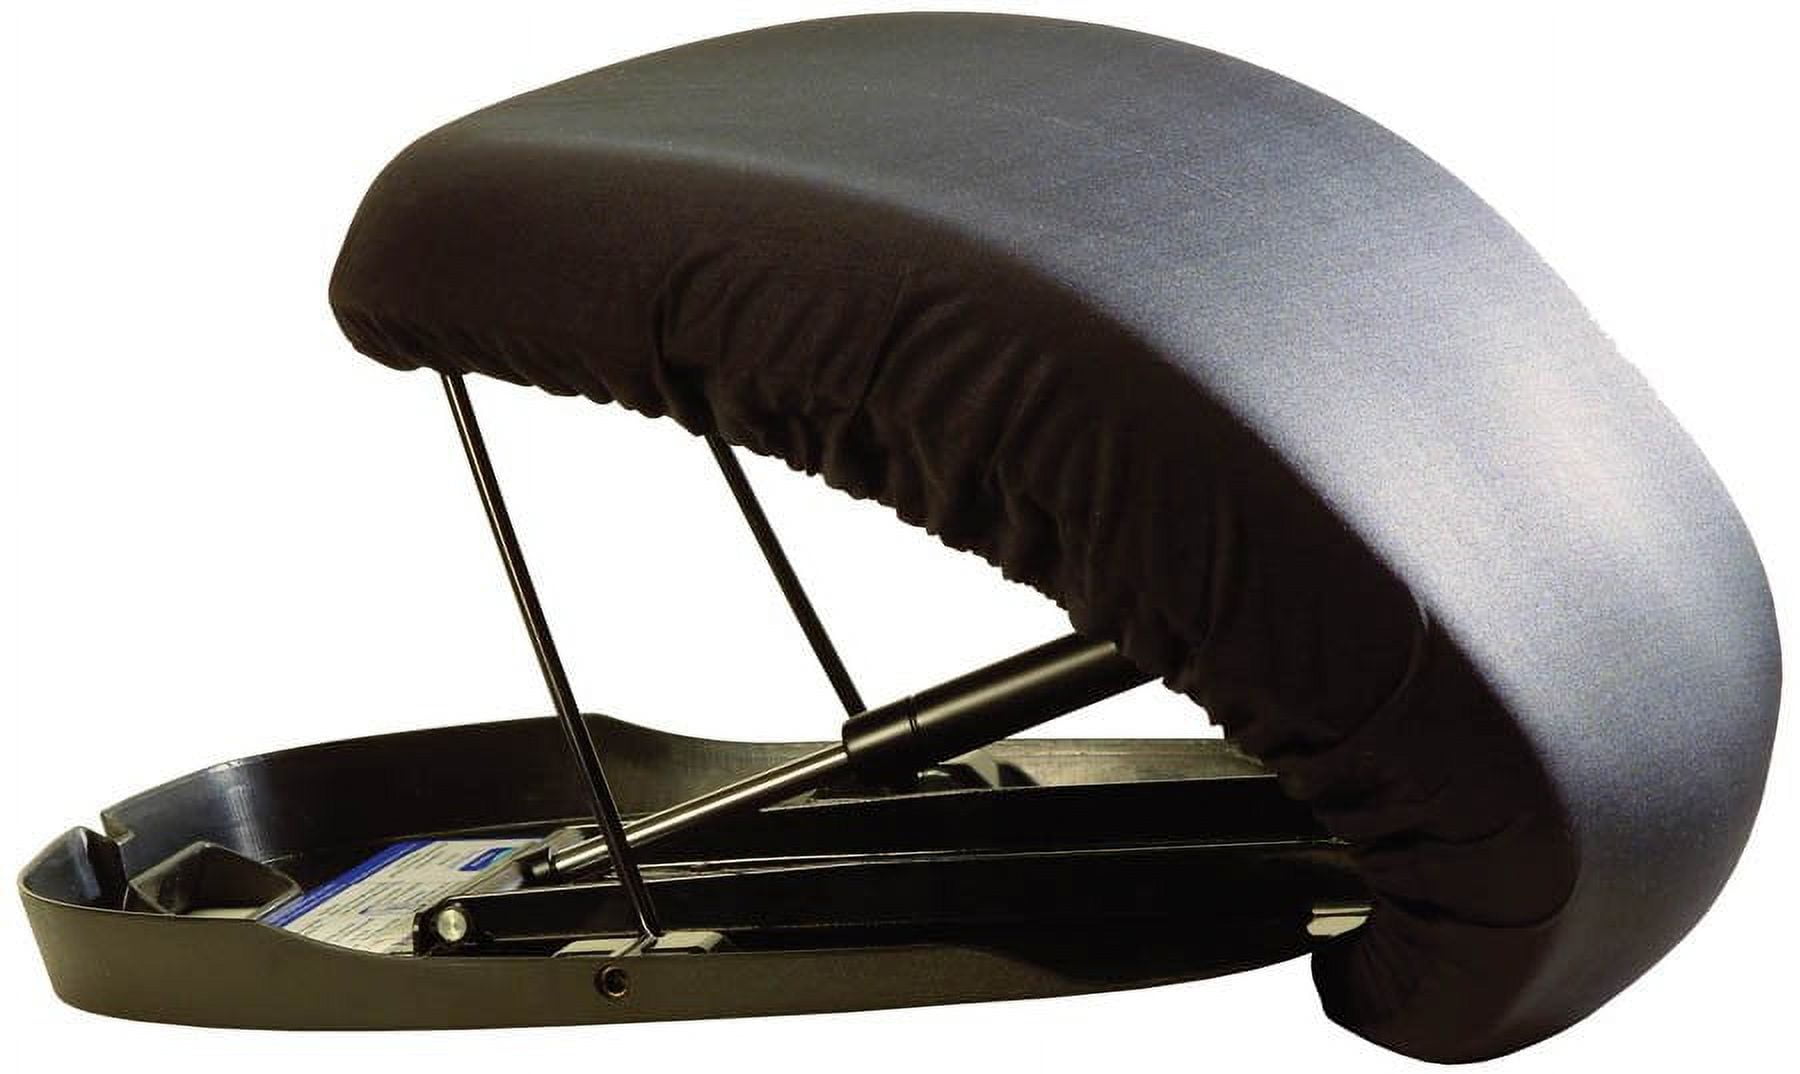 Premium Lift Assist Memory Foam Cushion by Seat Boost - Portable  Alternative to Lift Chairs, Stand Assist Handicap Mobility Help for 70%  Lift Support